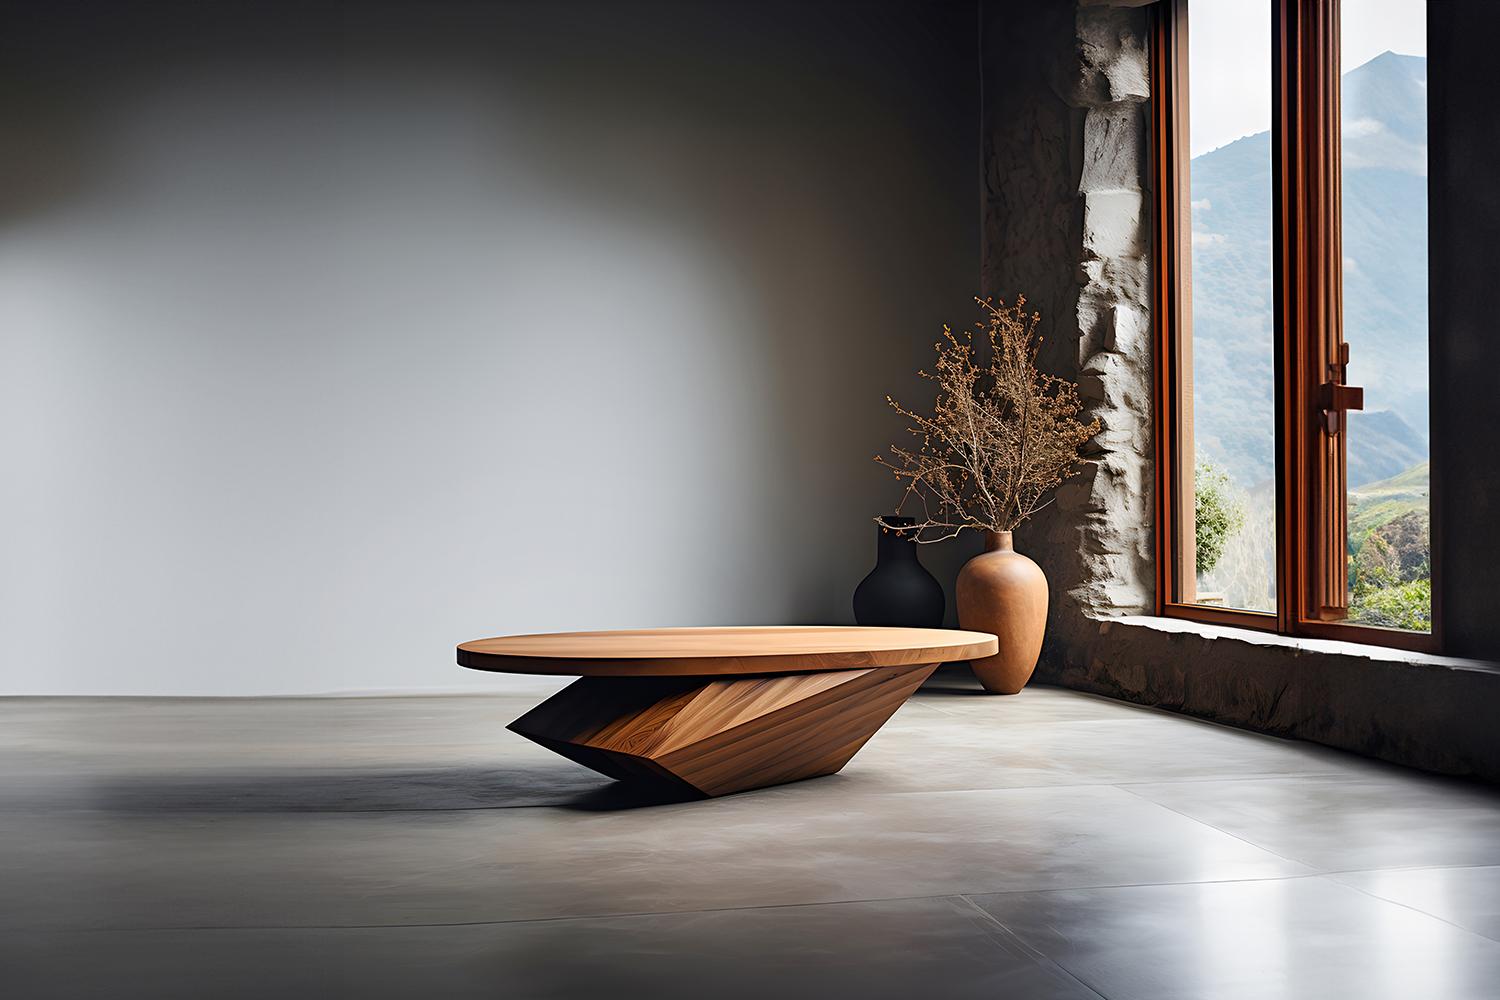 Sculptural Coffee Table Made of Solid Wood, Center Table Solace S13 by NONO


The Solace table series, designed by Joel Escalona, is a furniture collection that exudes balance and presence, thanks to its sensuous, dense, and irregular shapes. These